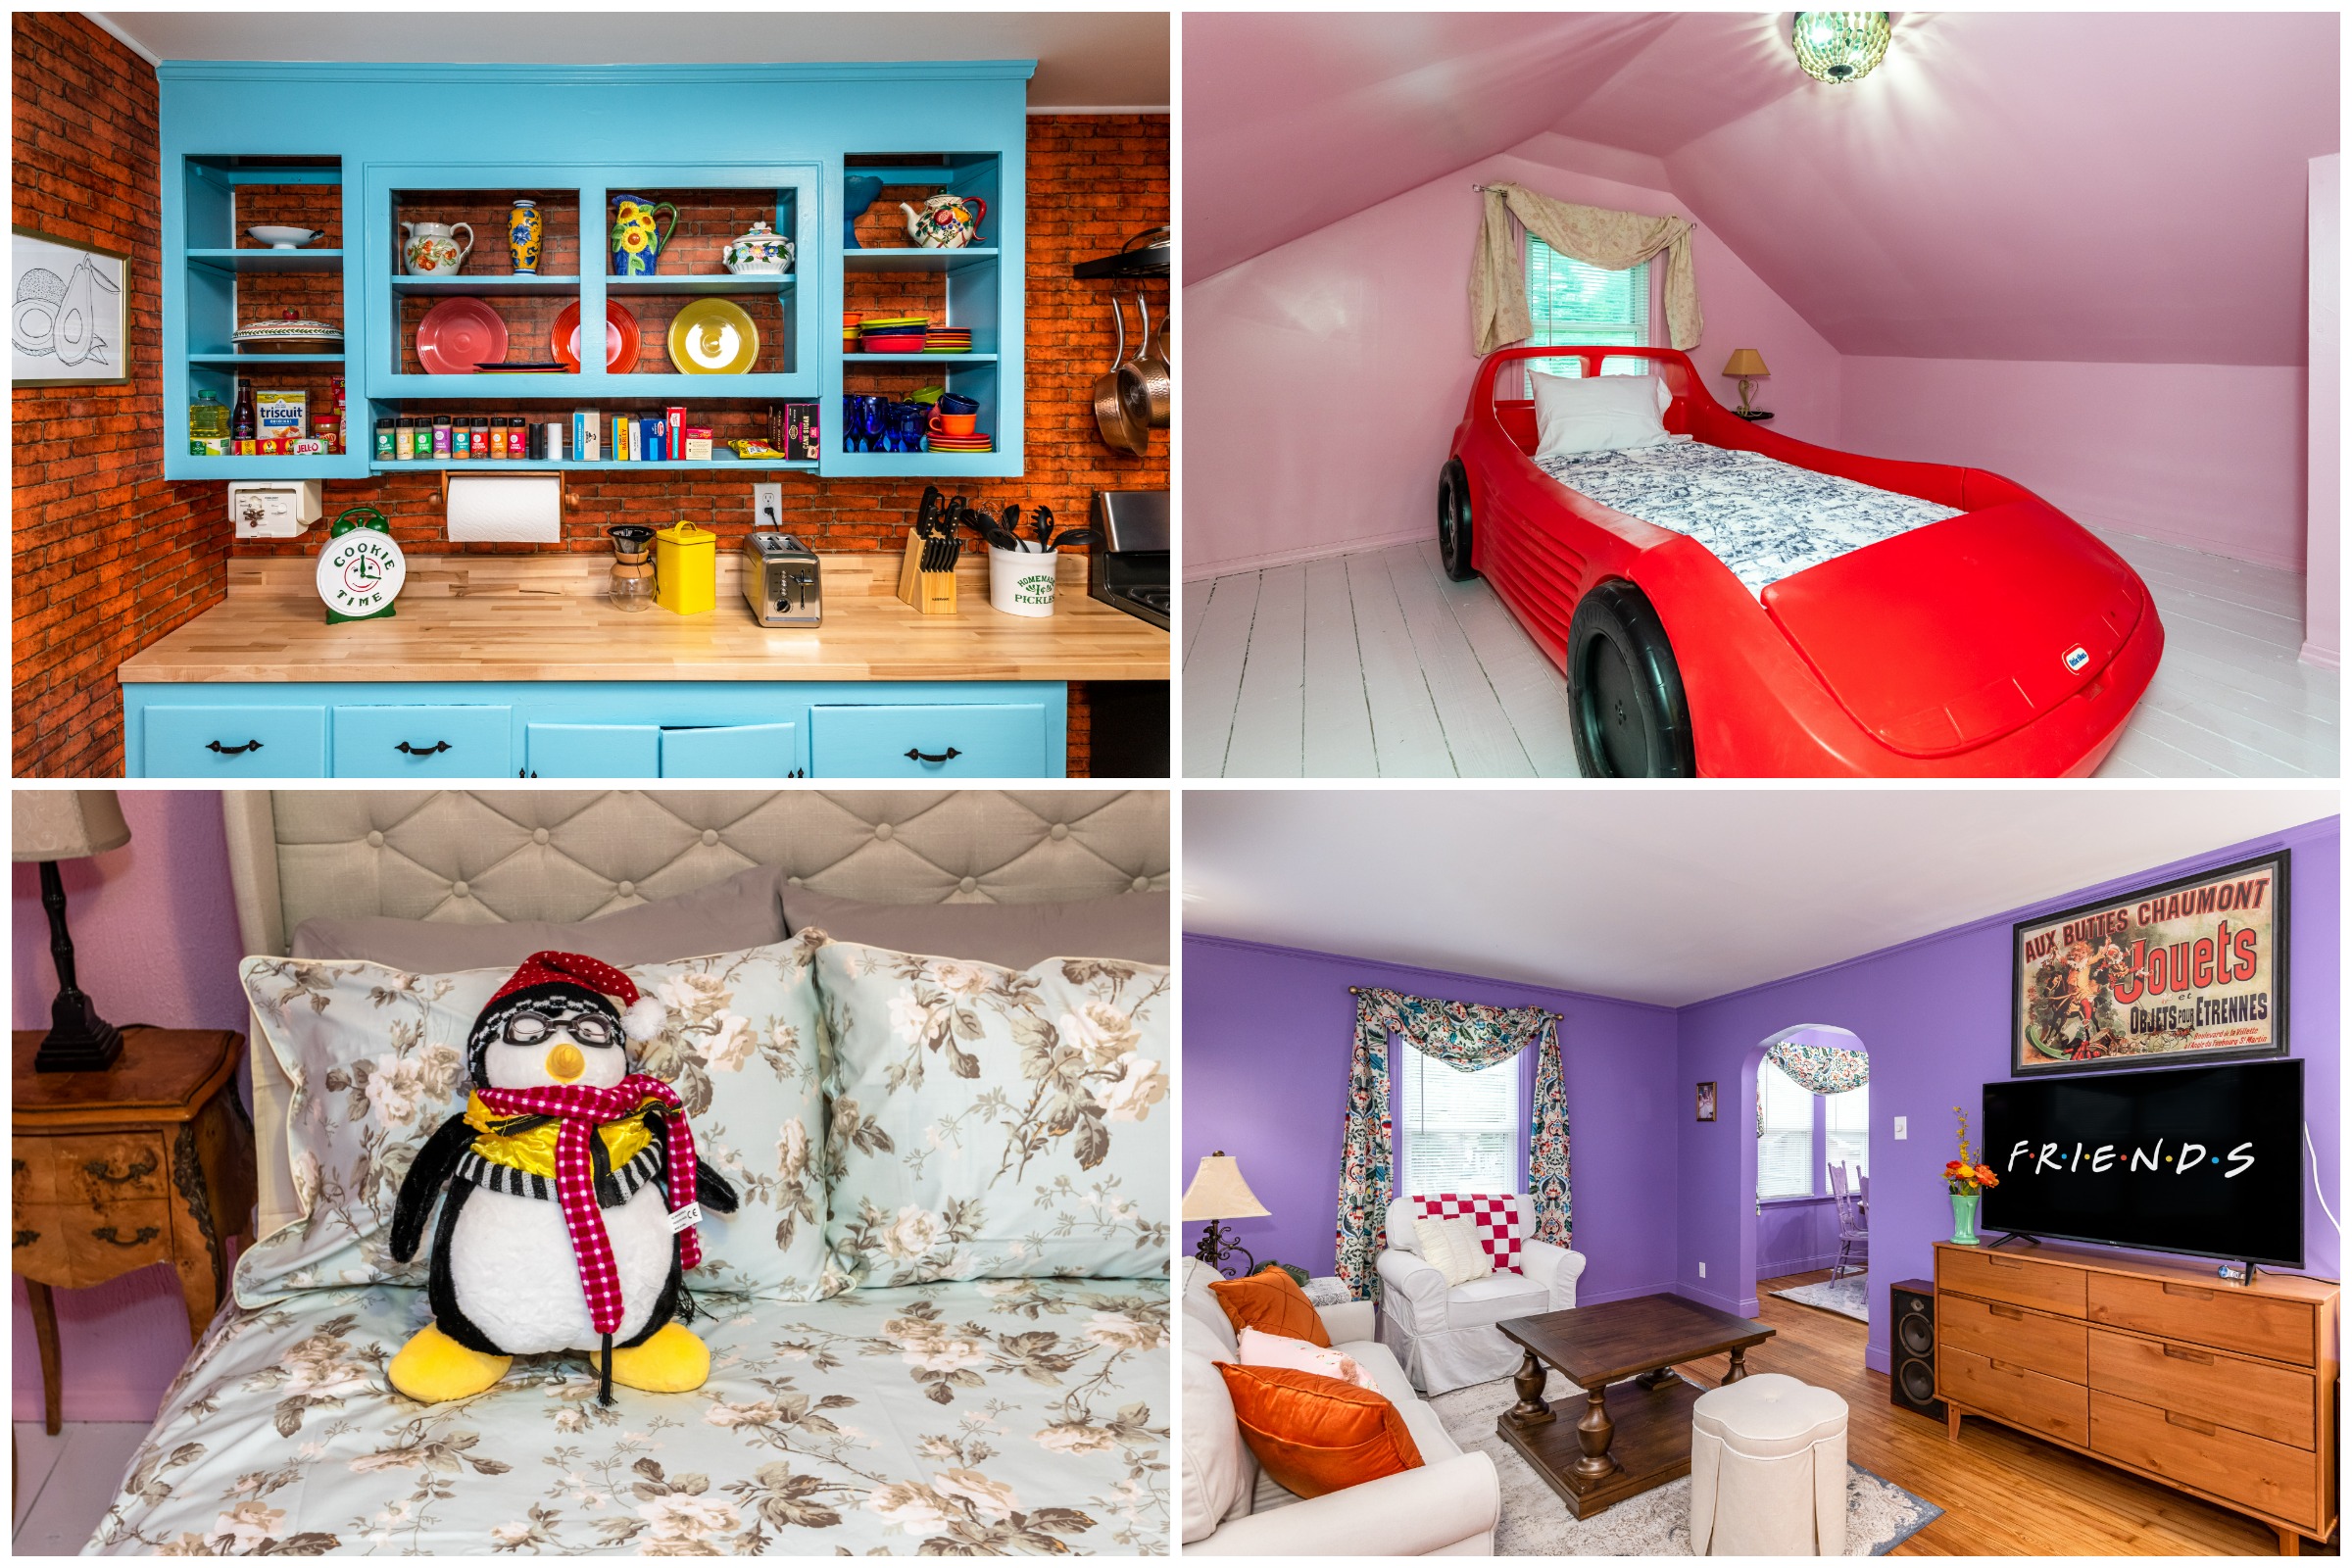 See Inside This ‘Friends’-Themed Home in Ohio Which Even Has a Race Car Bed